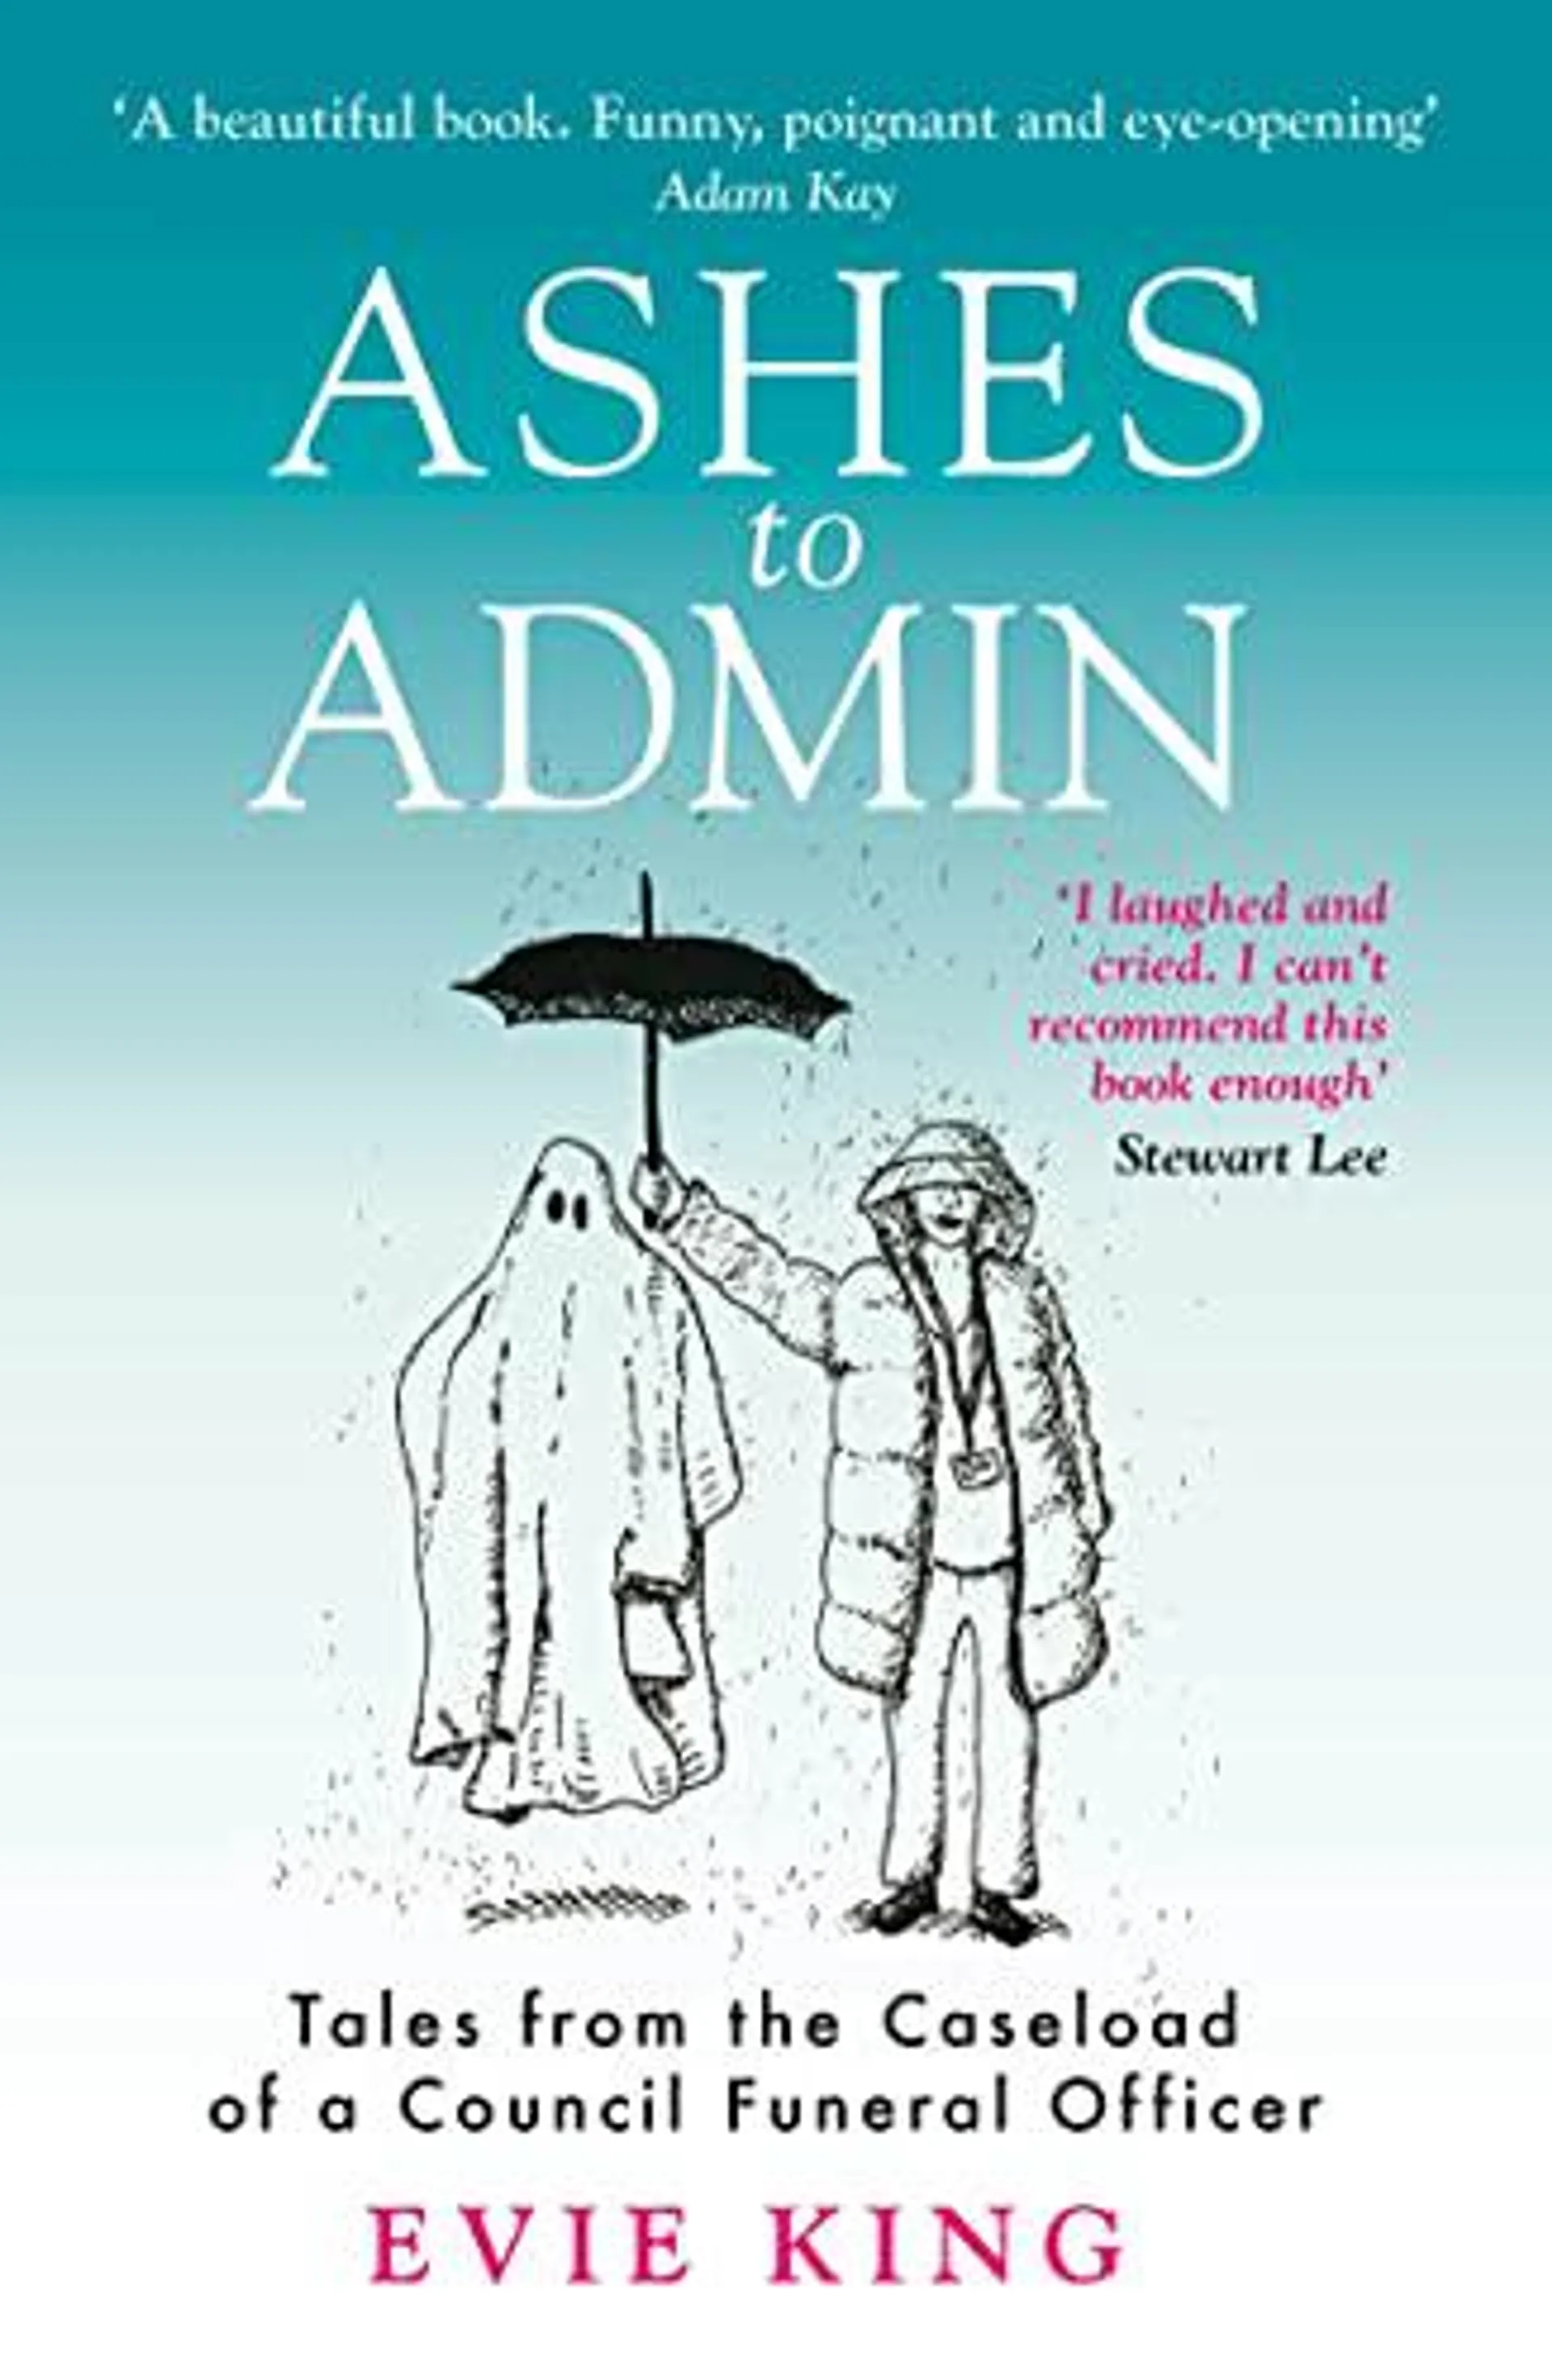 Ashes To Admin by Evie King